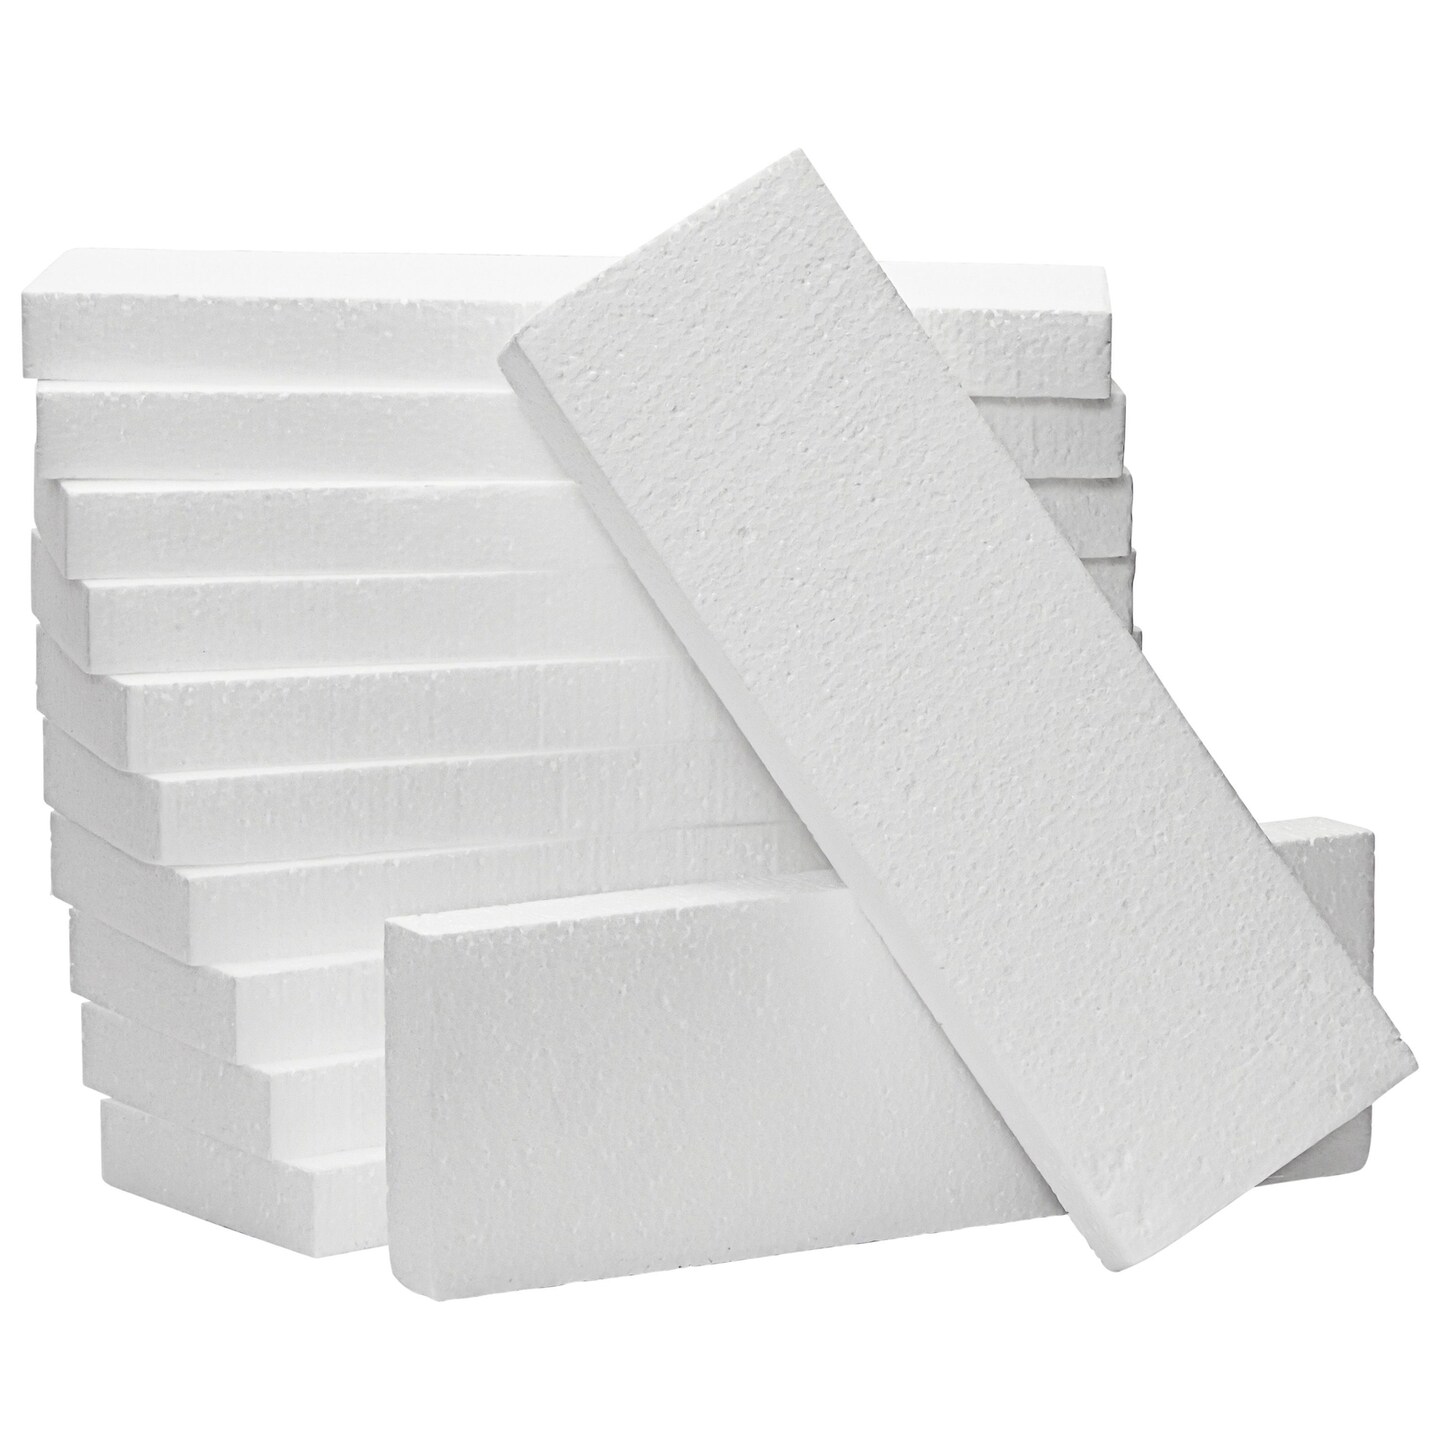 High Density Foam Board Building Block Diorama Base Foam Blocks for Crafts  Material Sand Table Construction Modelling Material